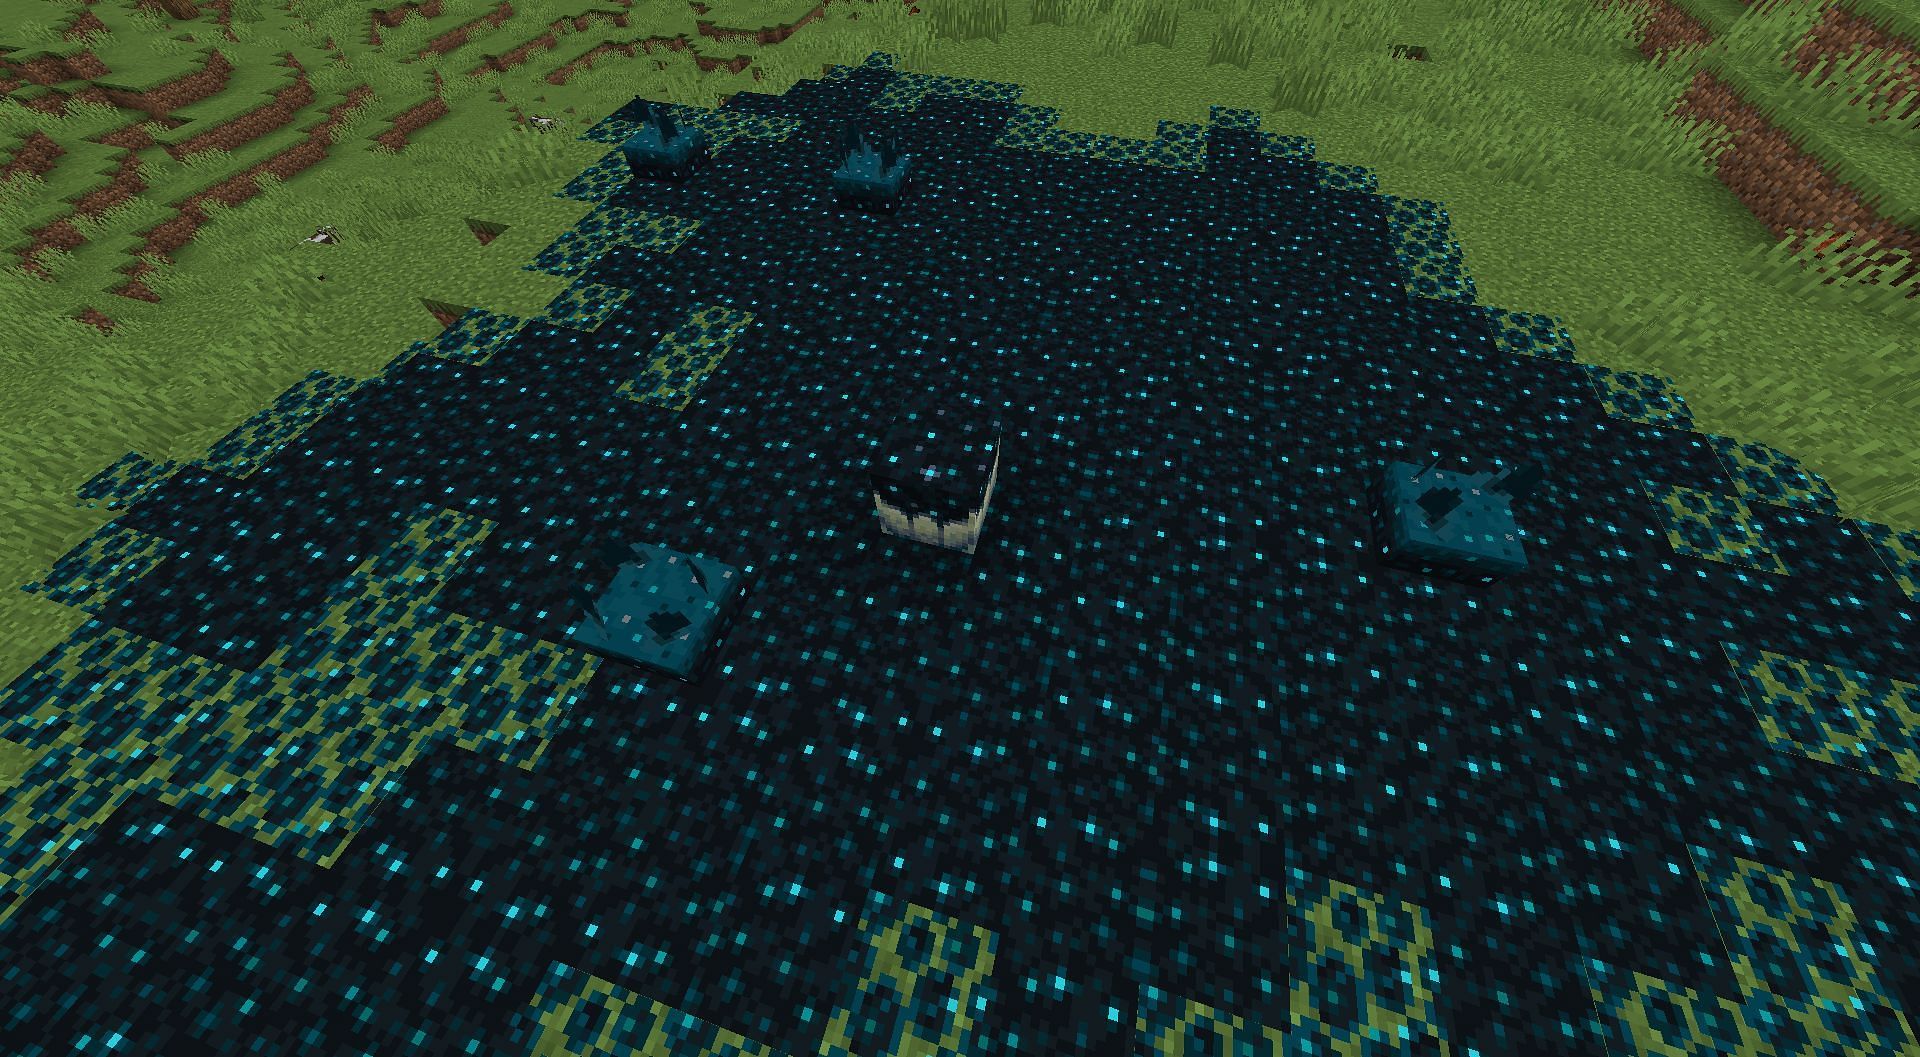 Sculk catalyst can absorb XP orbs dropped from mobs and players and spread sculk blocks in Minecraft The Wild Update (Image via Mojang)